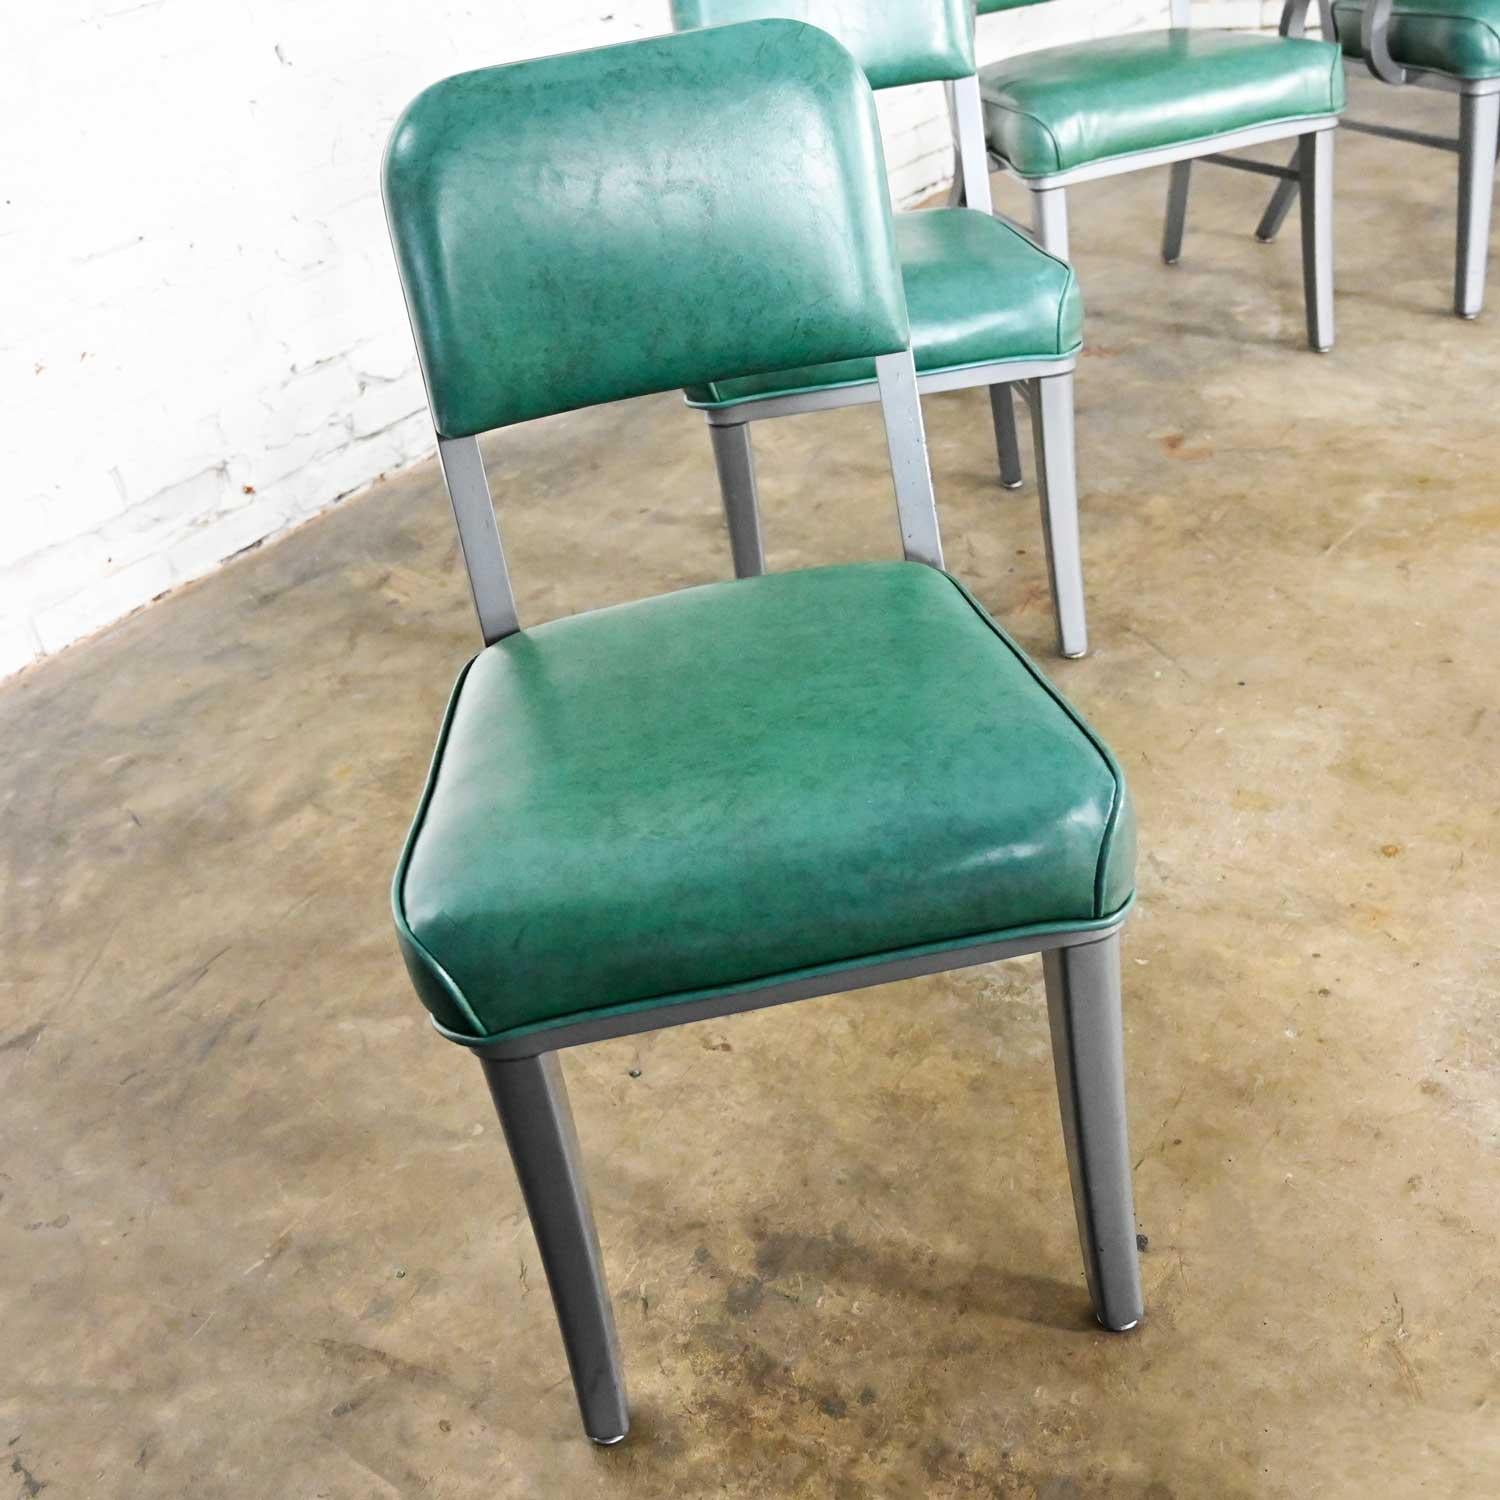 Streamline Industrial Metal & Green Vinyl Faux Leather Dining Chairs Set of 6 3